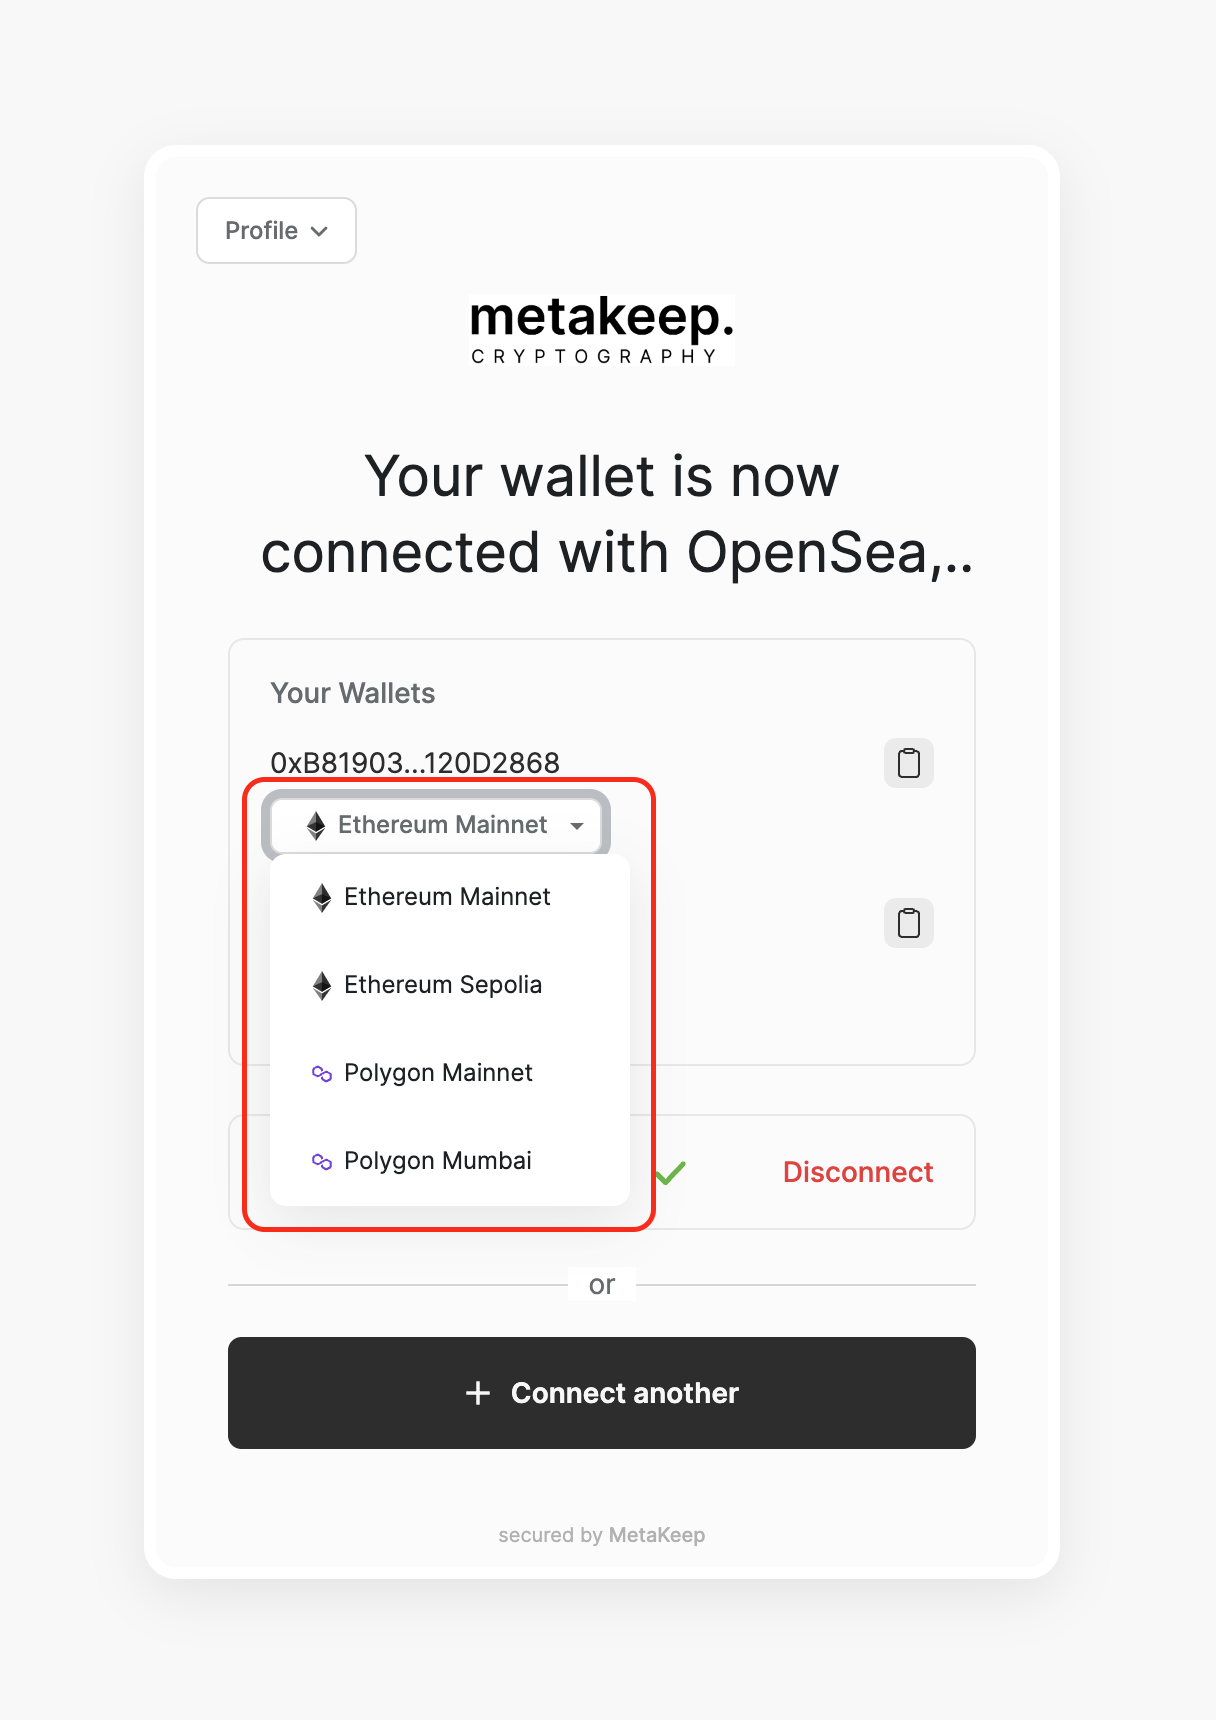 Switch Network in the wallet